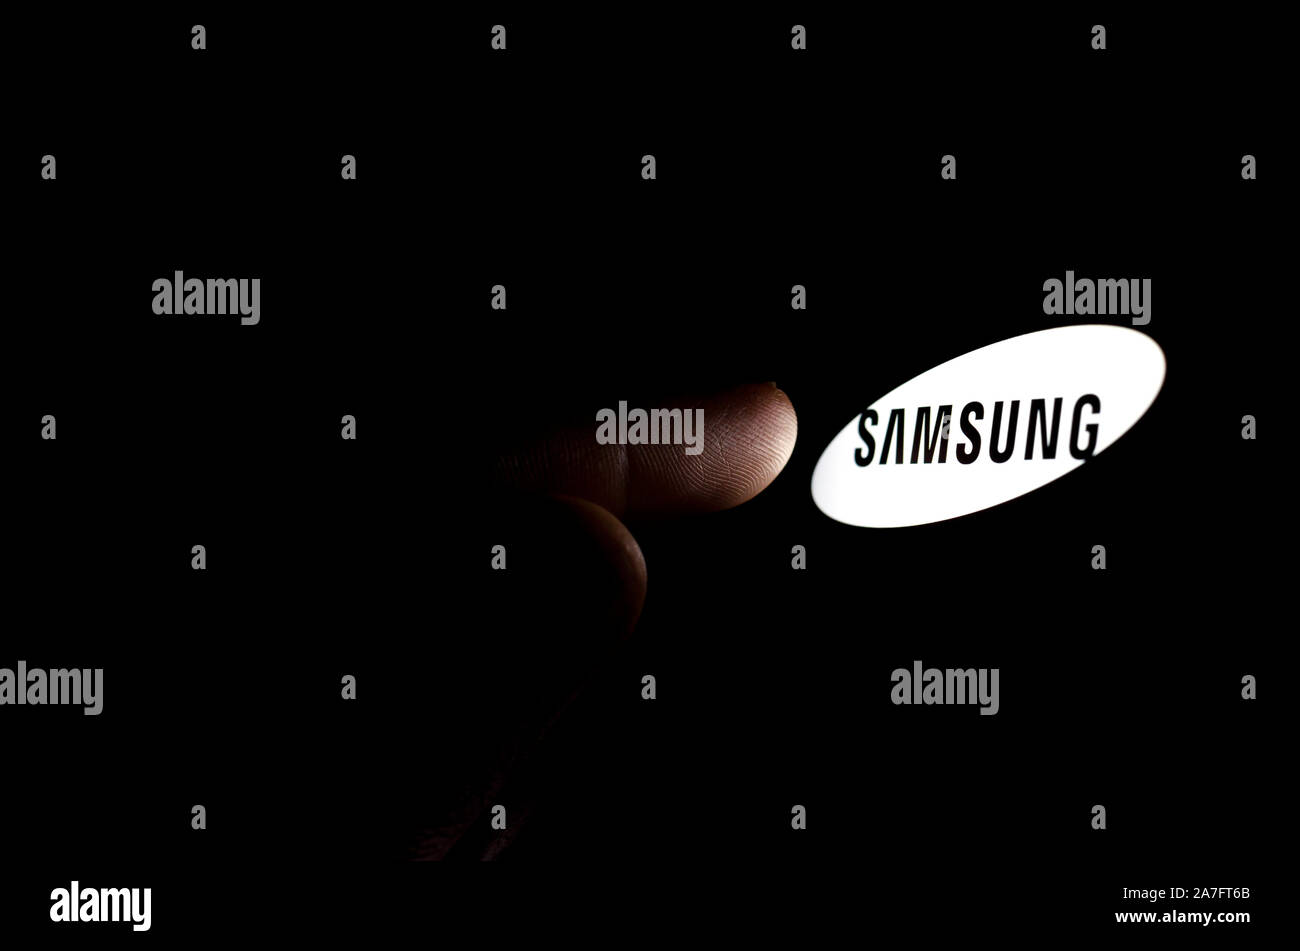 Samsung logo on a smartphone screen in a dark room and a finger touching it. Stock Photo